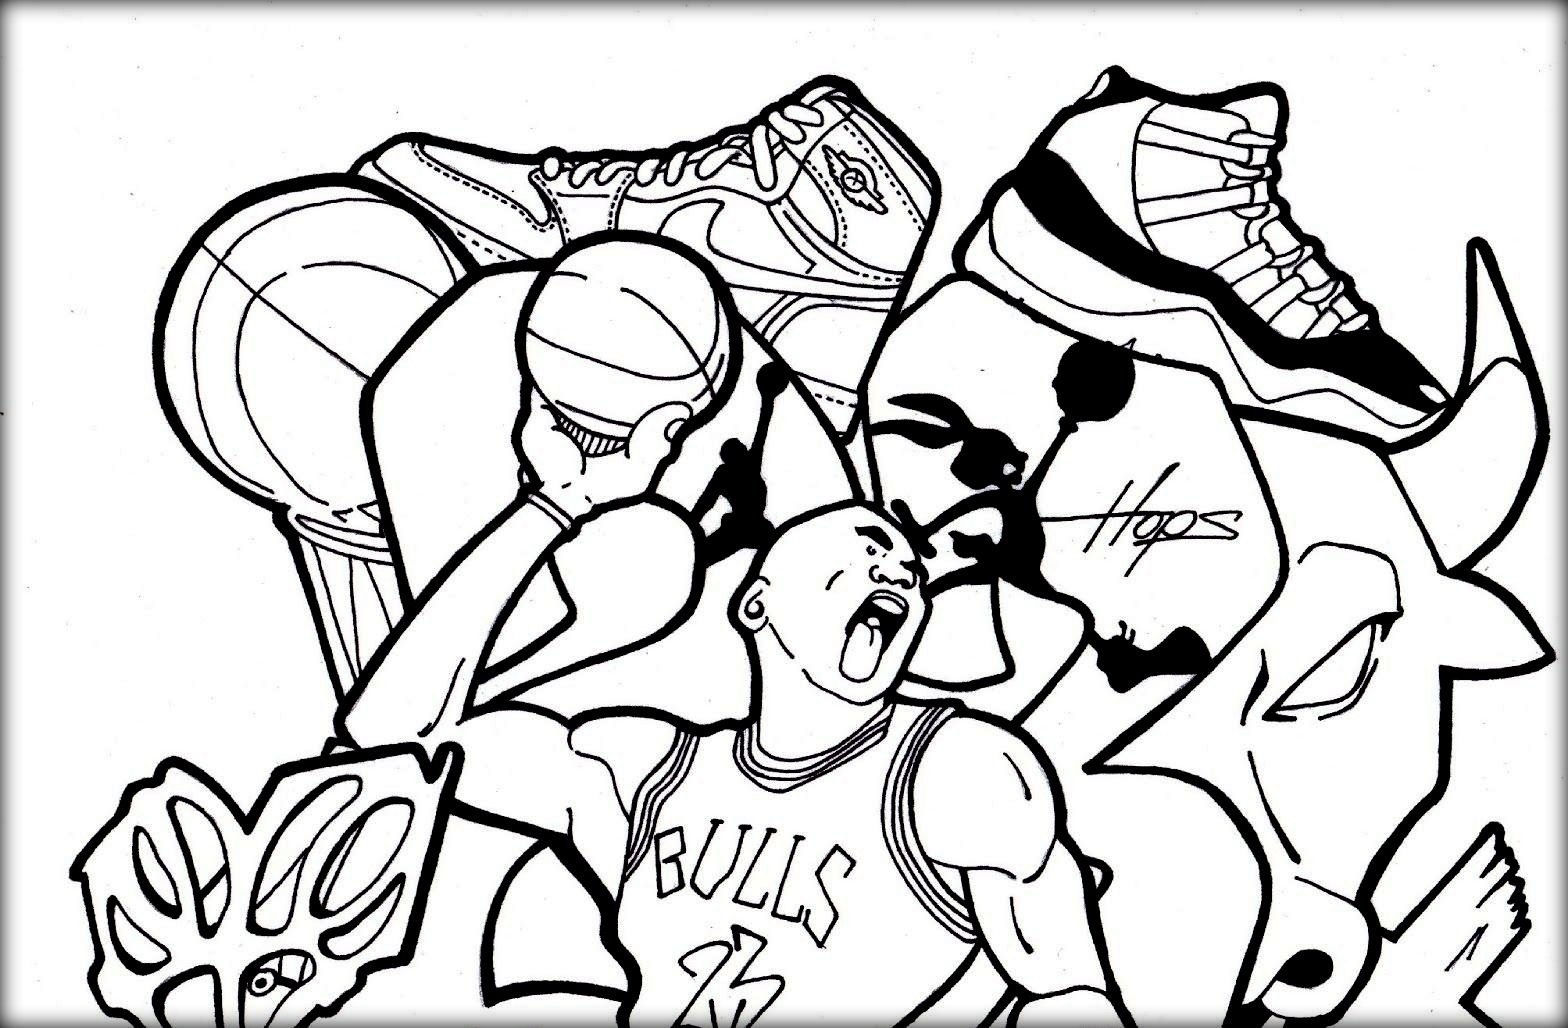 Nike Coloring Pages - Best Coloring Pages For Kids